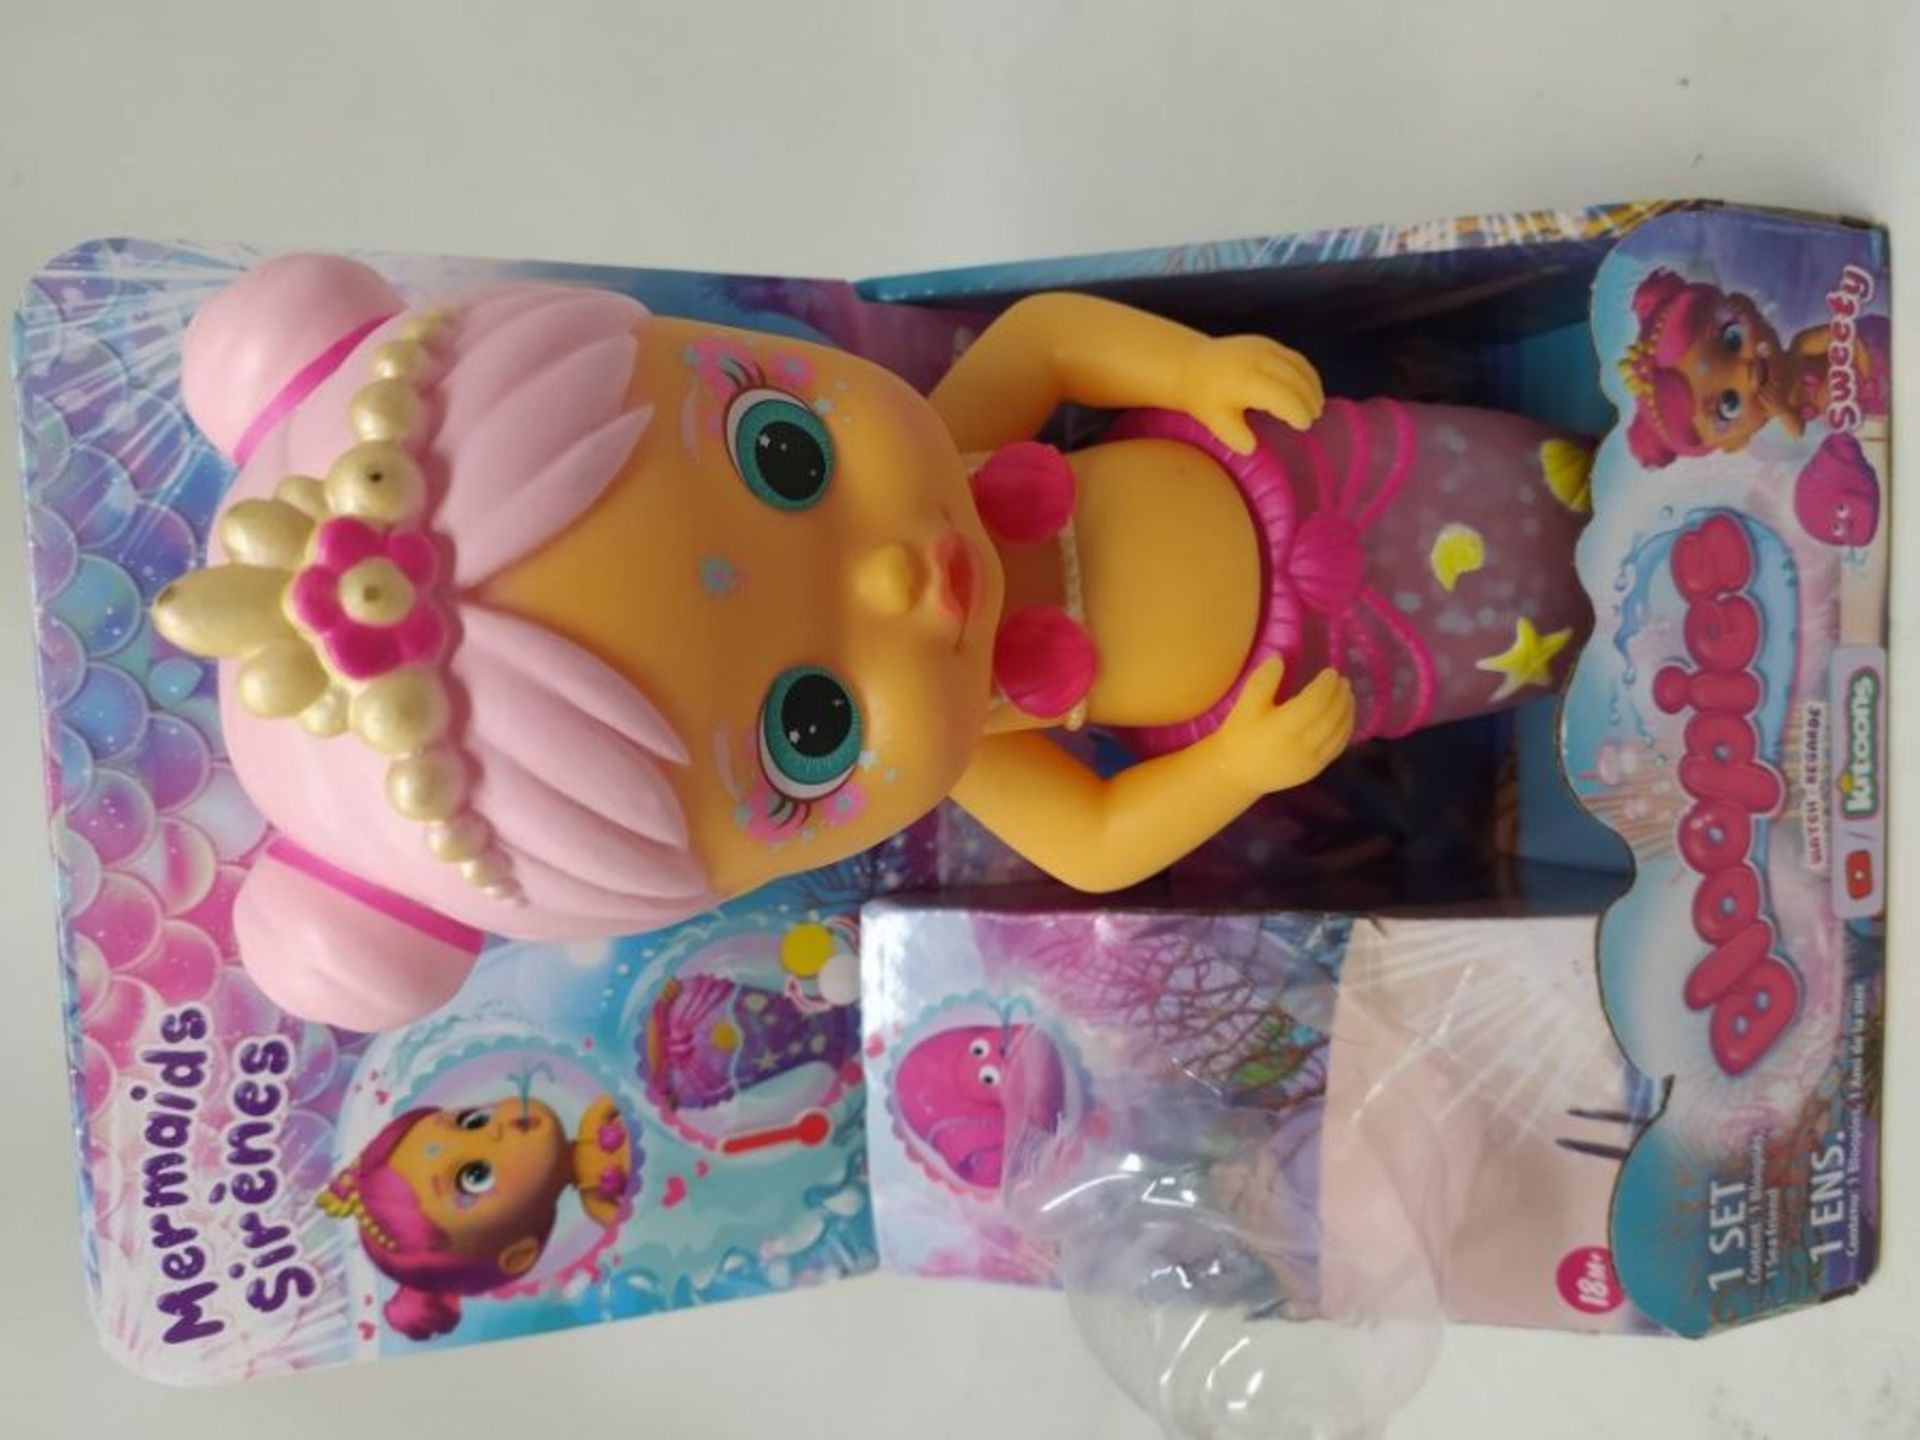 [INCOMPLETE] IMC Toys 99623IM Bloopies Mermaids Sweety, (Assorted Model) - Image 2 of 2